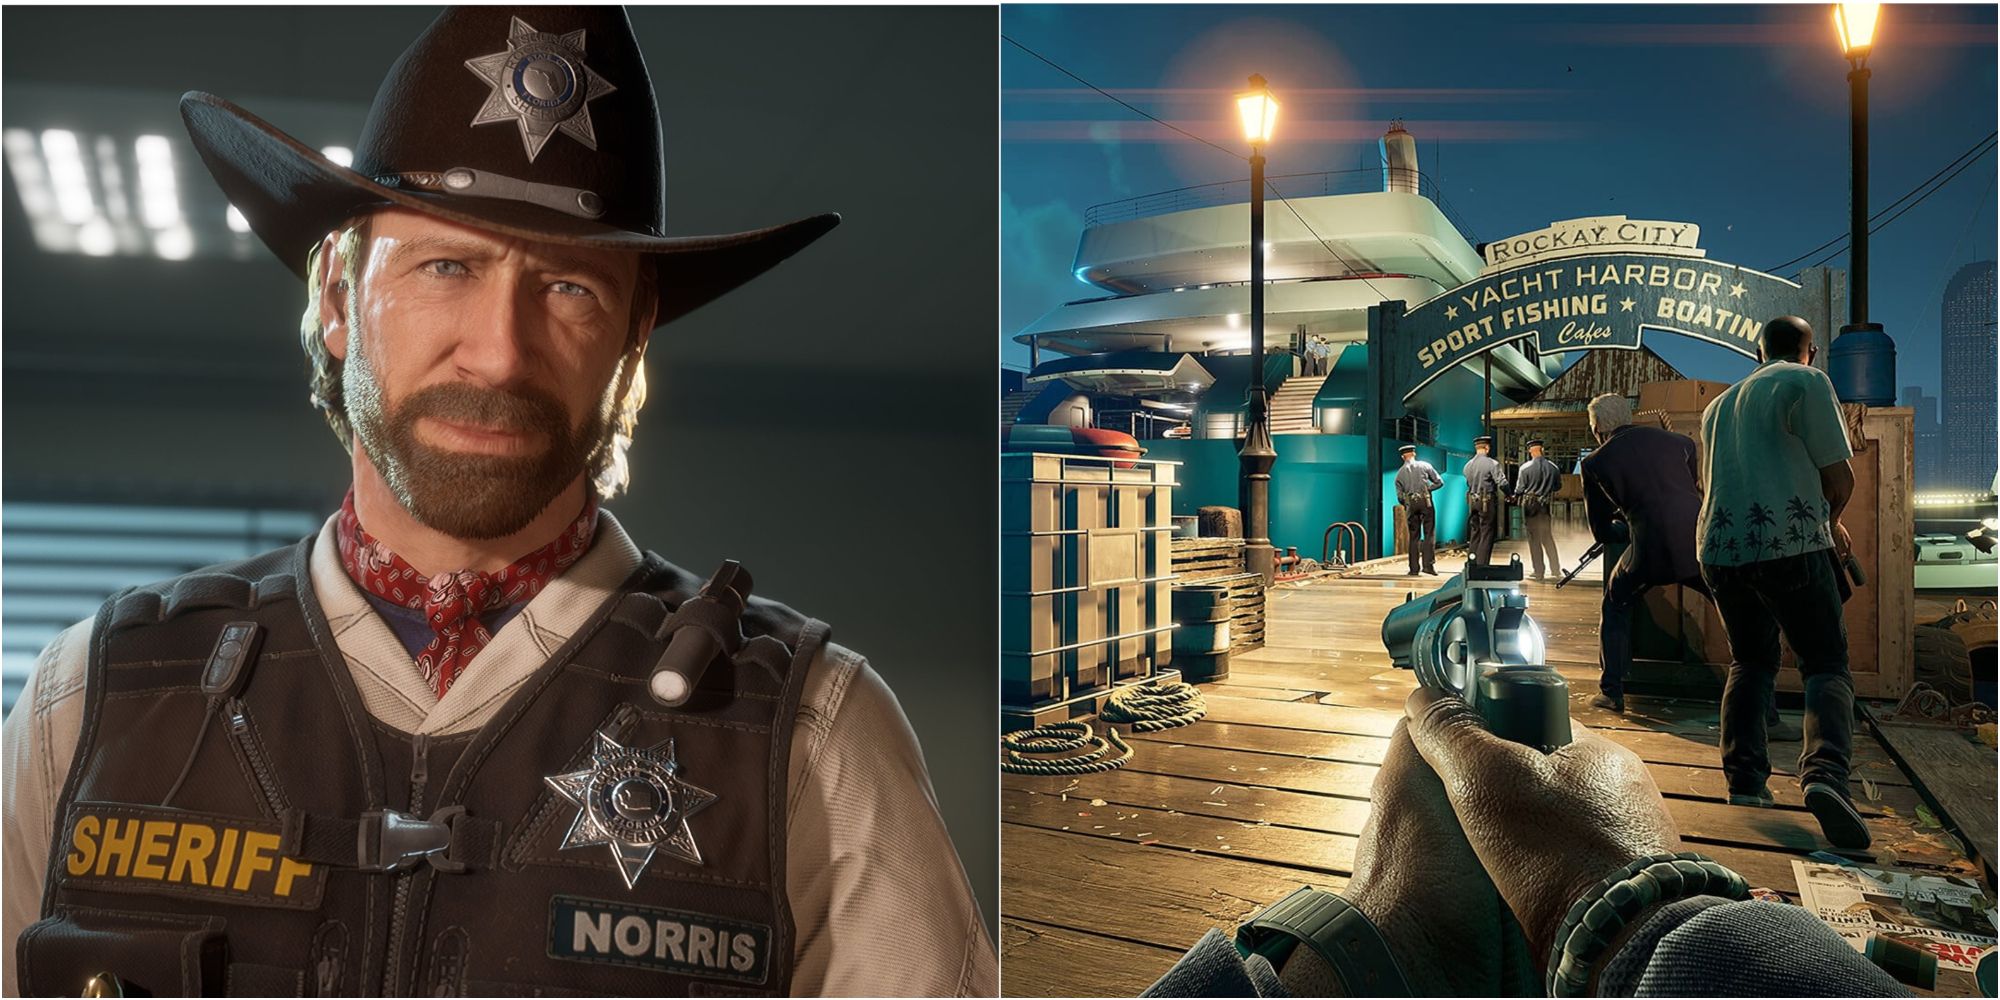 Crime Boss Rockay City - Sheriff Chuck Noris and Stealth gameplay with a revolver